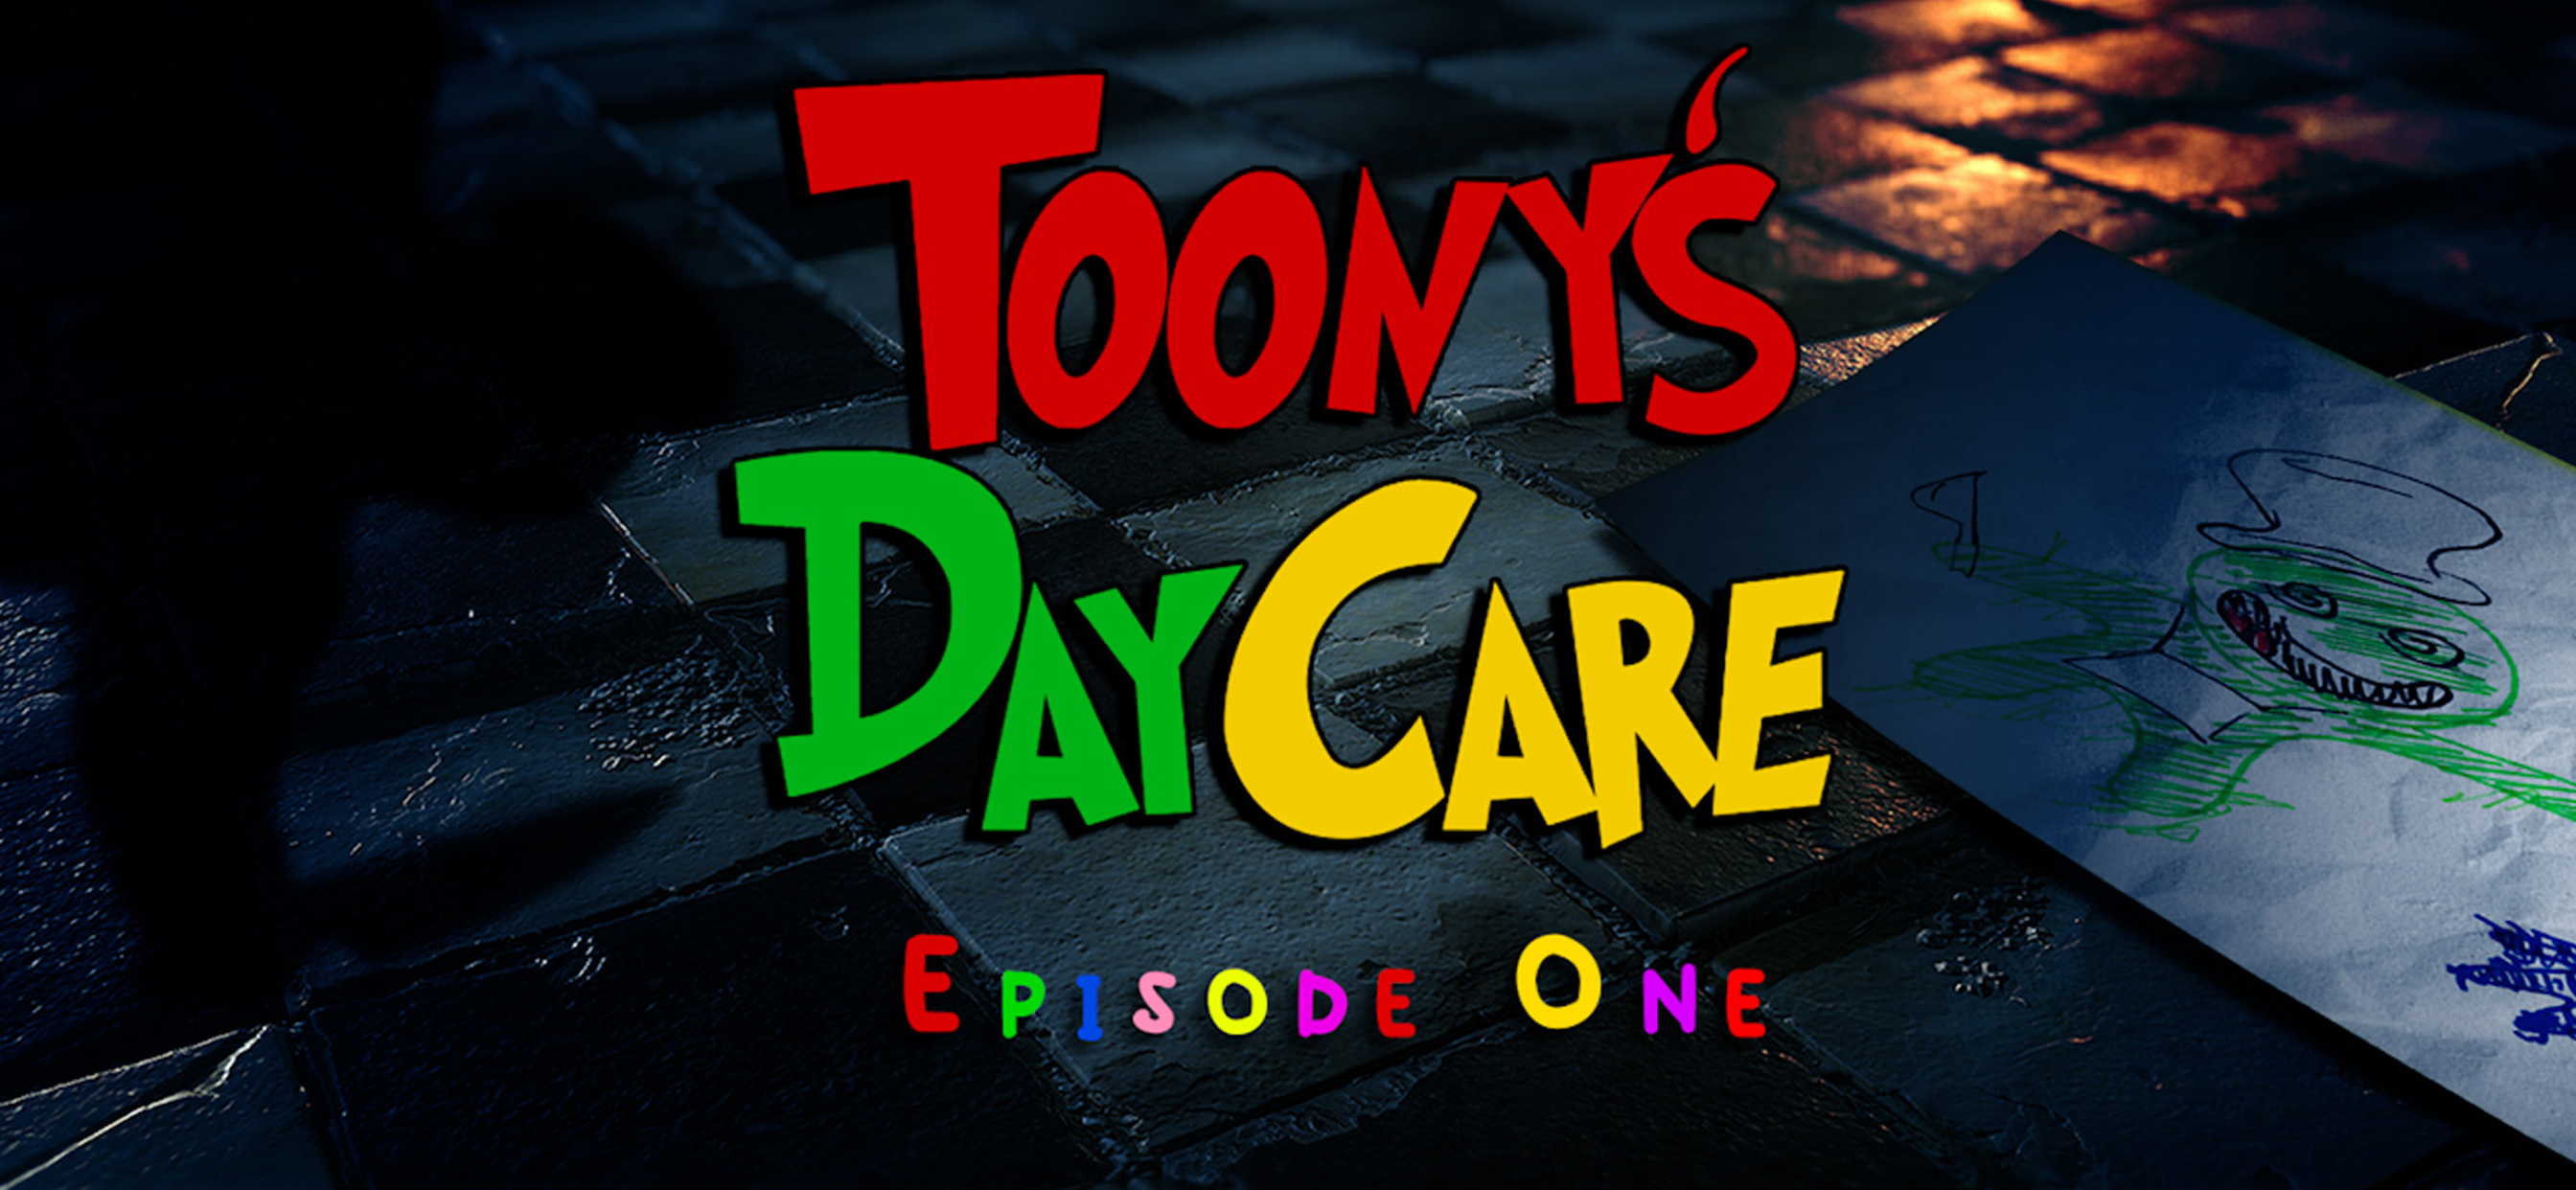 Toony's Daycare Episode 1